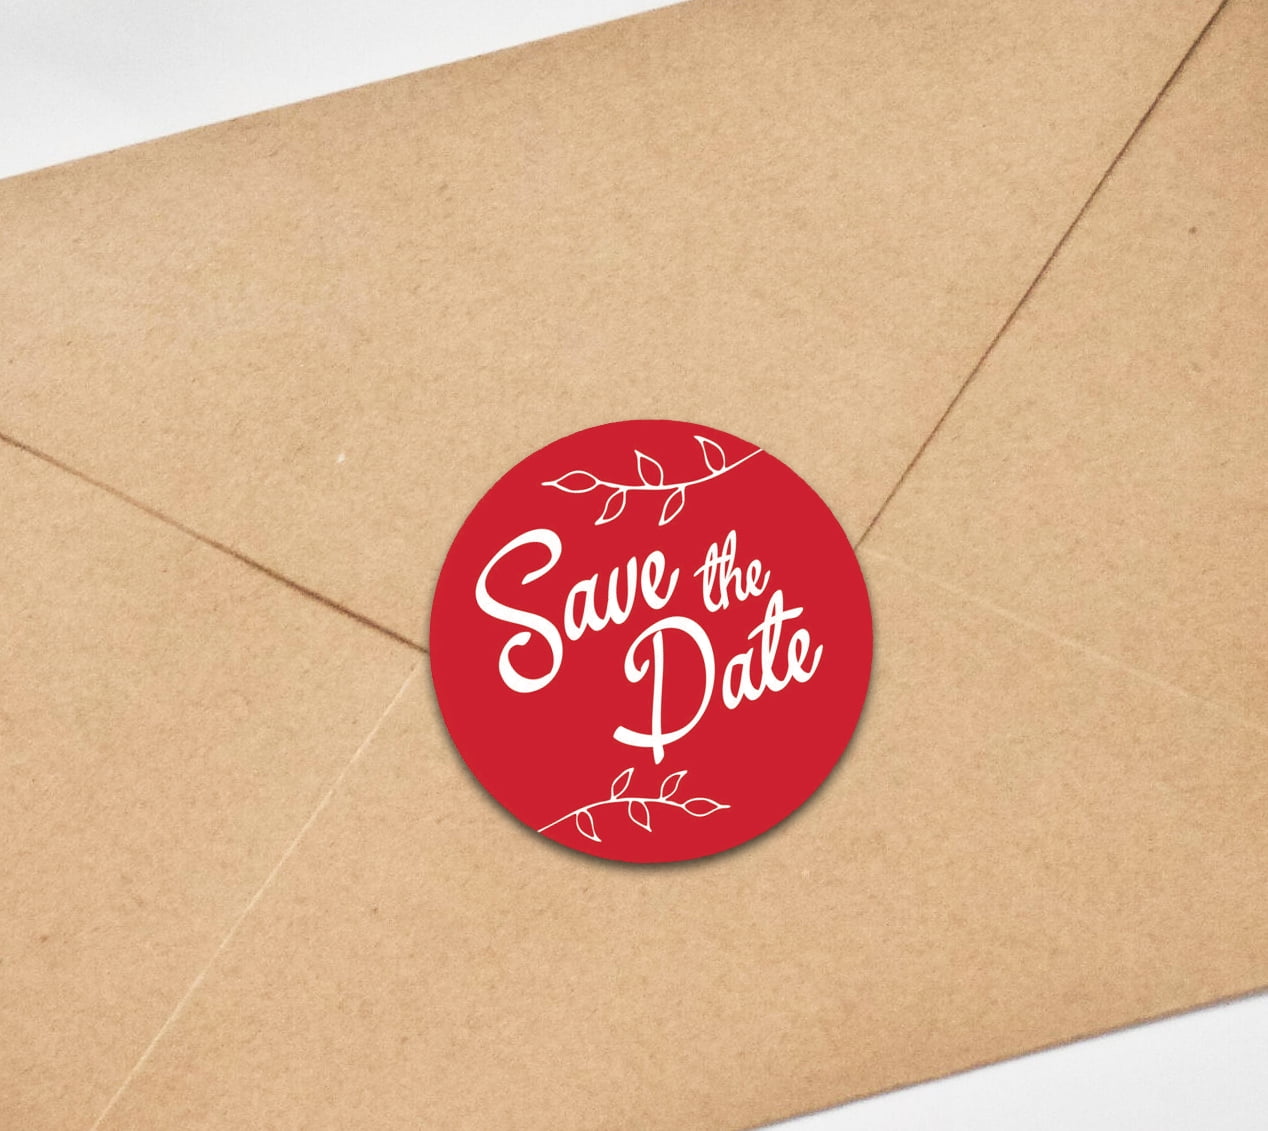 Darling Souvenir DIY 45 Pcs White Leaf Vines Save The Date Stickers Round  Envelope Seal-1.6 Inches